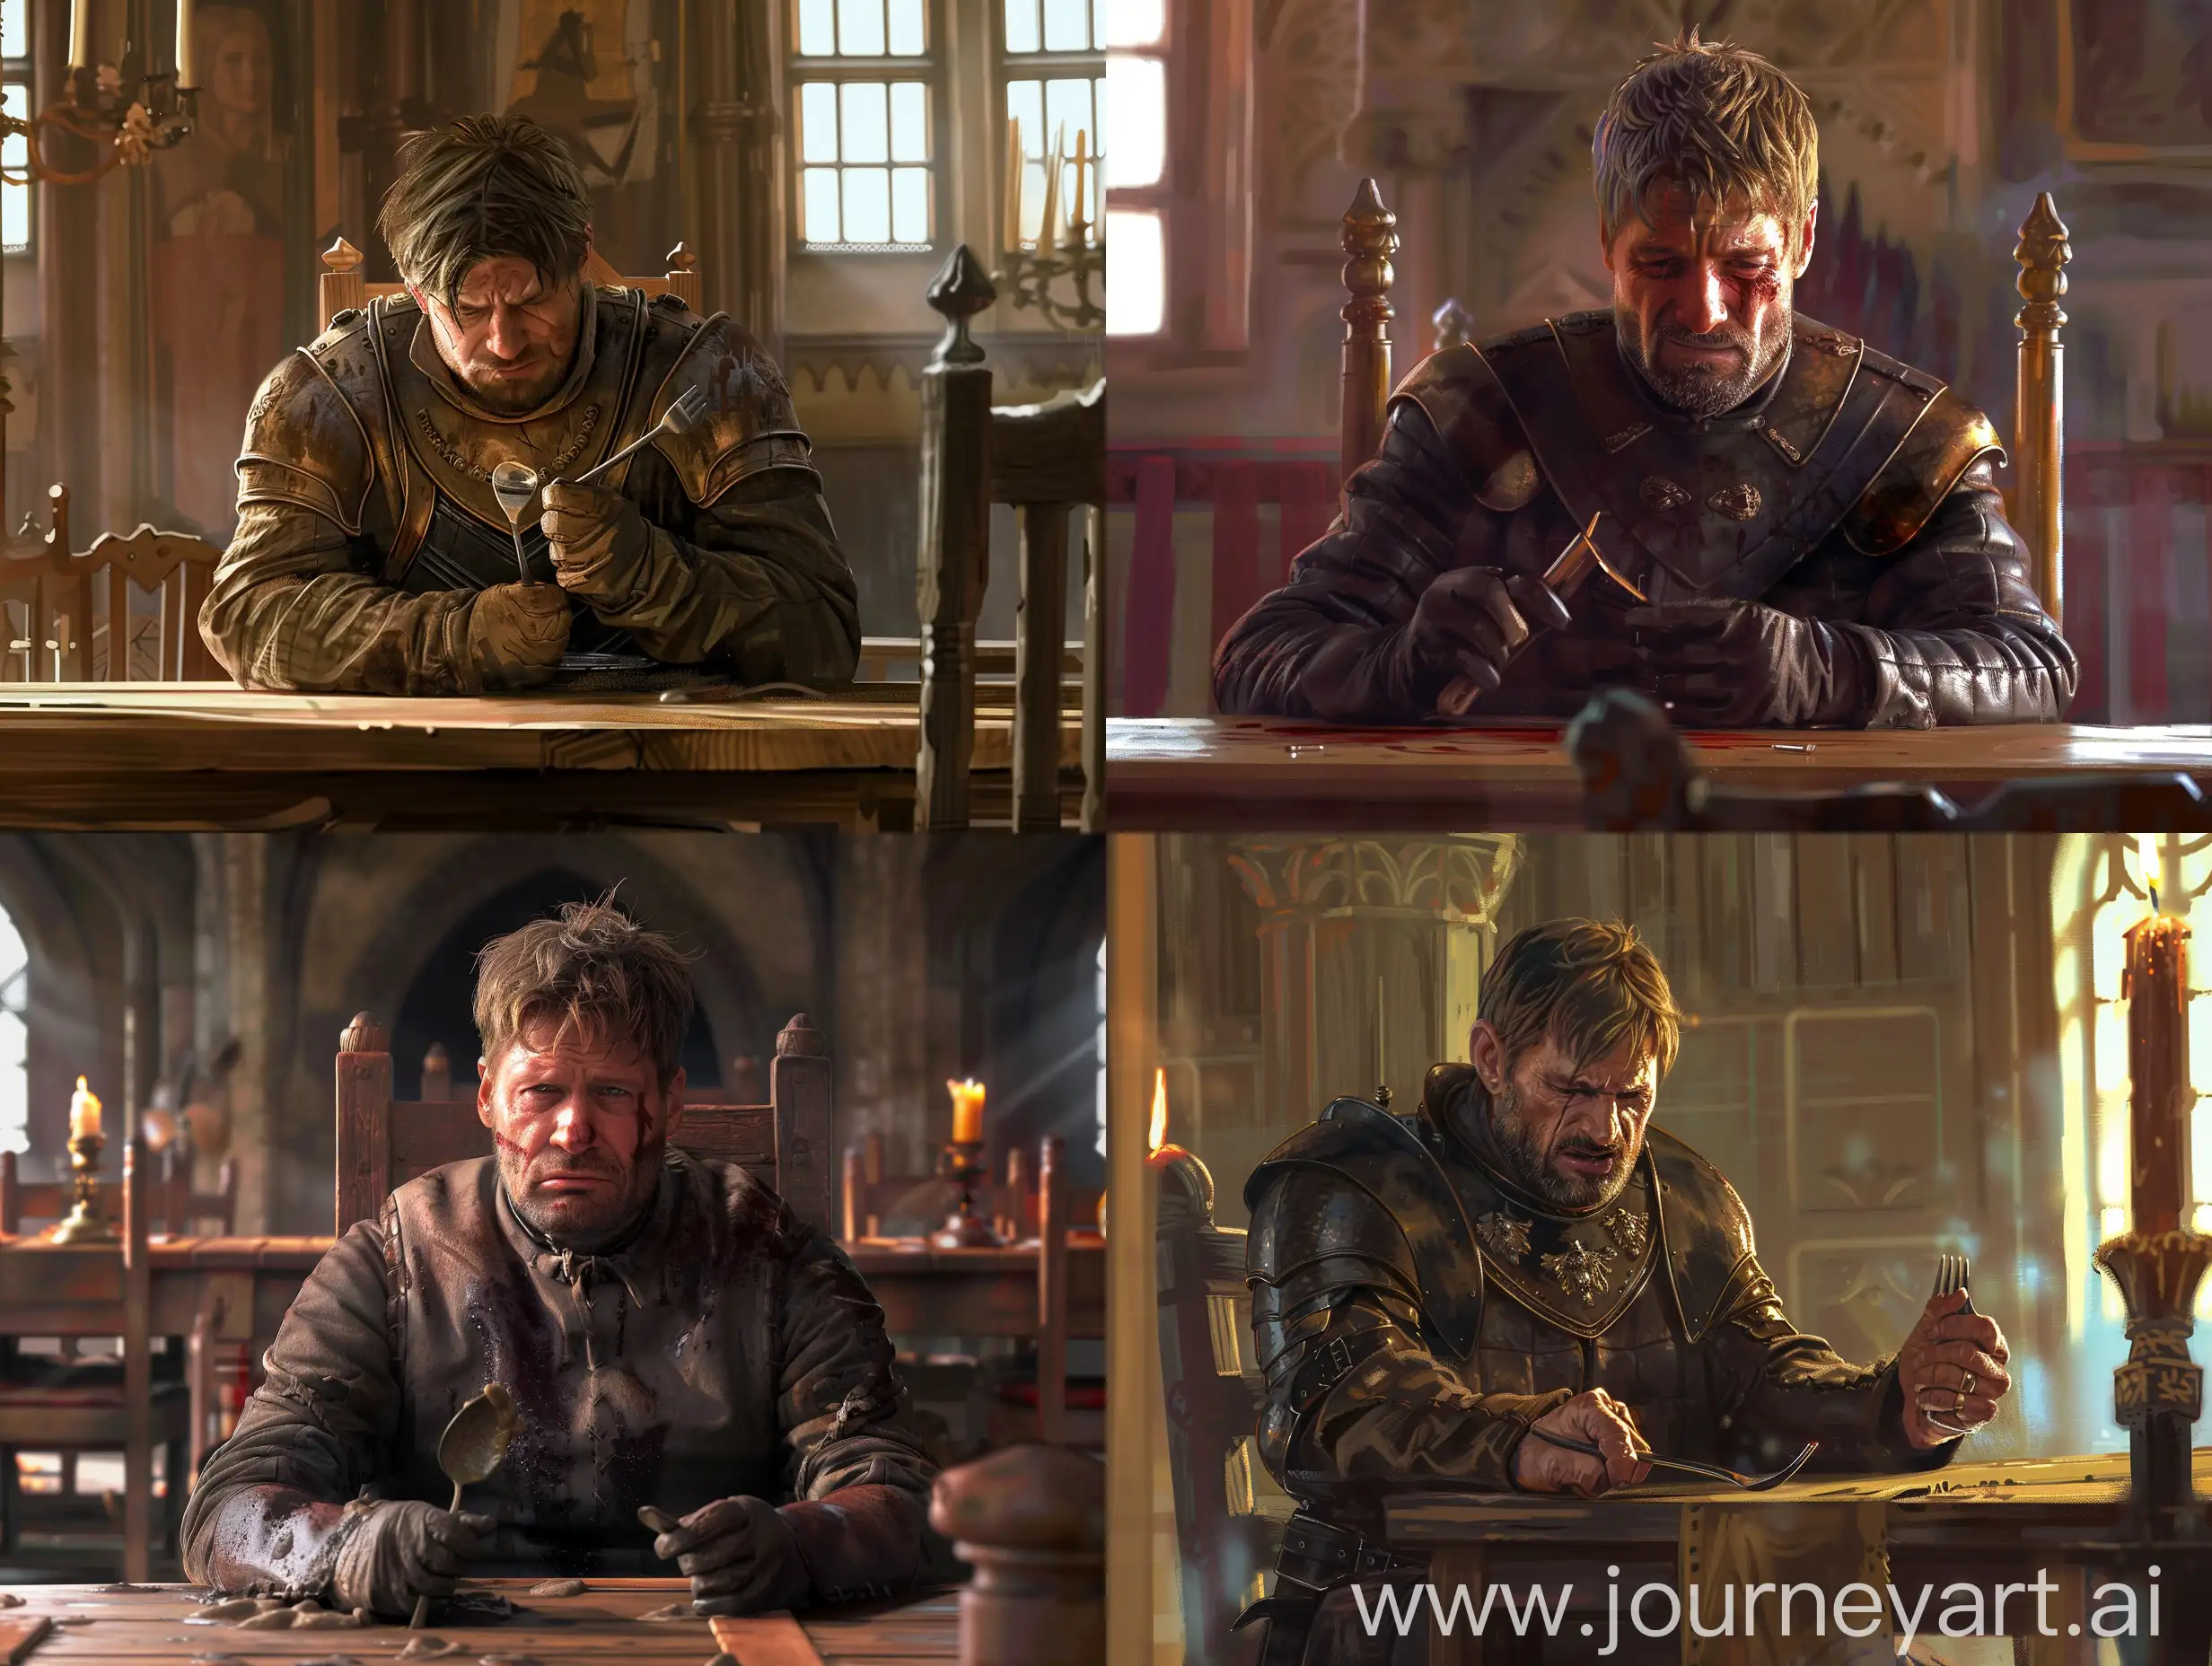 Jaime Lannister in Game of Thrones series, Jaime Lannister is clearly fatter and fatter, Jaime Lannister's face and body are very fat, Jaime Lannister sits at the dining table of Winterfell, Jaime Lannister is sitting on a wooden chair, Lannister is sad and hungry. Jaime has a spoon in his right hand, Jaime Lannister is holding a fork in his left hand, Jaime Lannister's expression is pure despair, the background is the dining hall of Winterfell Palace, the style of Witcher, the lighting is classic style, realistic, Claire, q2